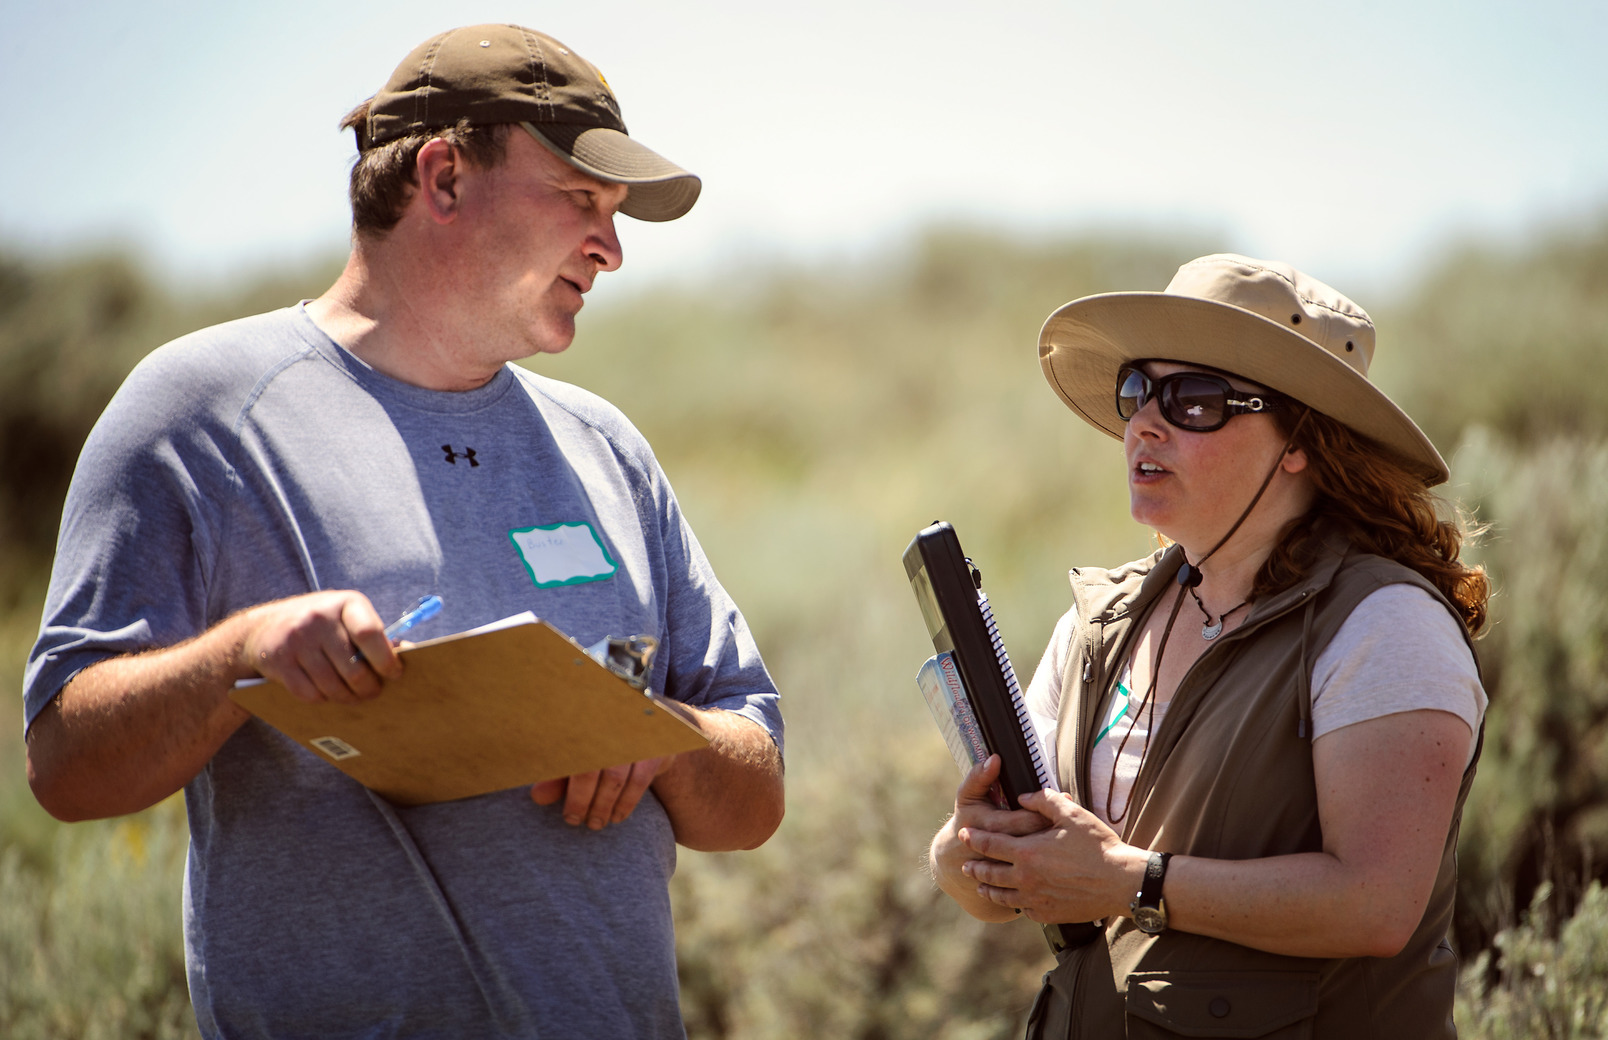 A student and faculty member discuss a project in the field.